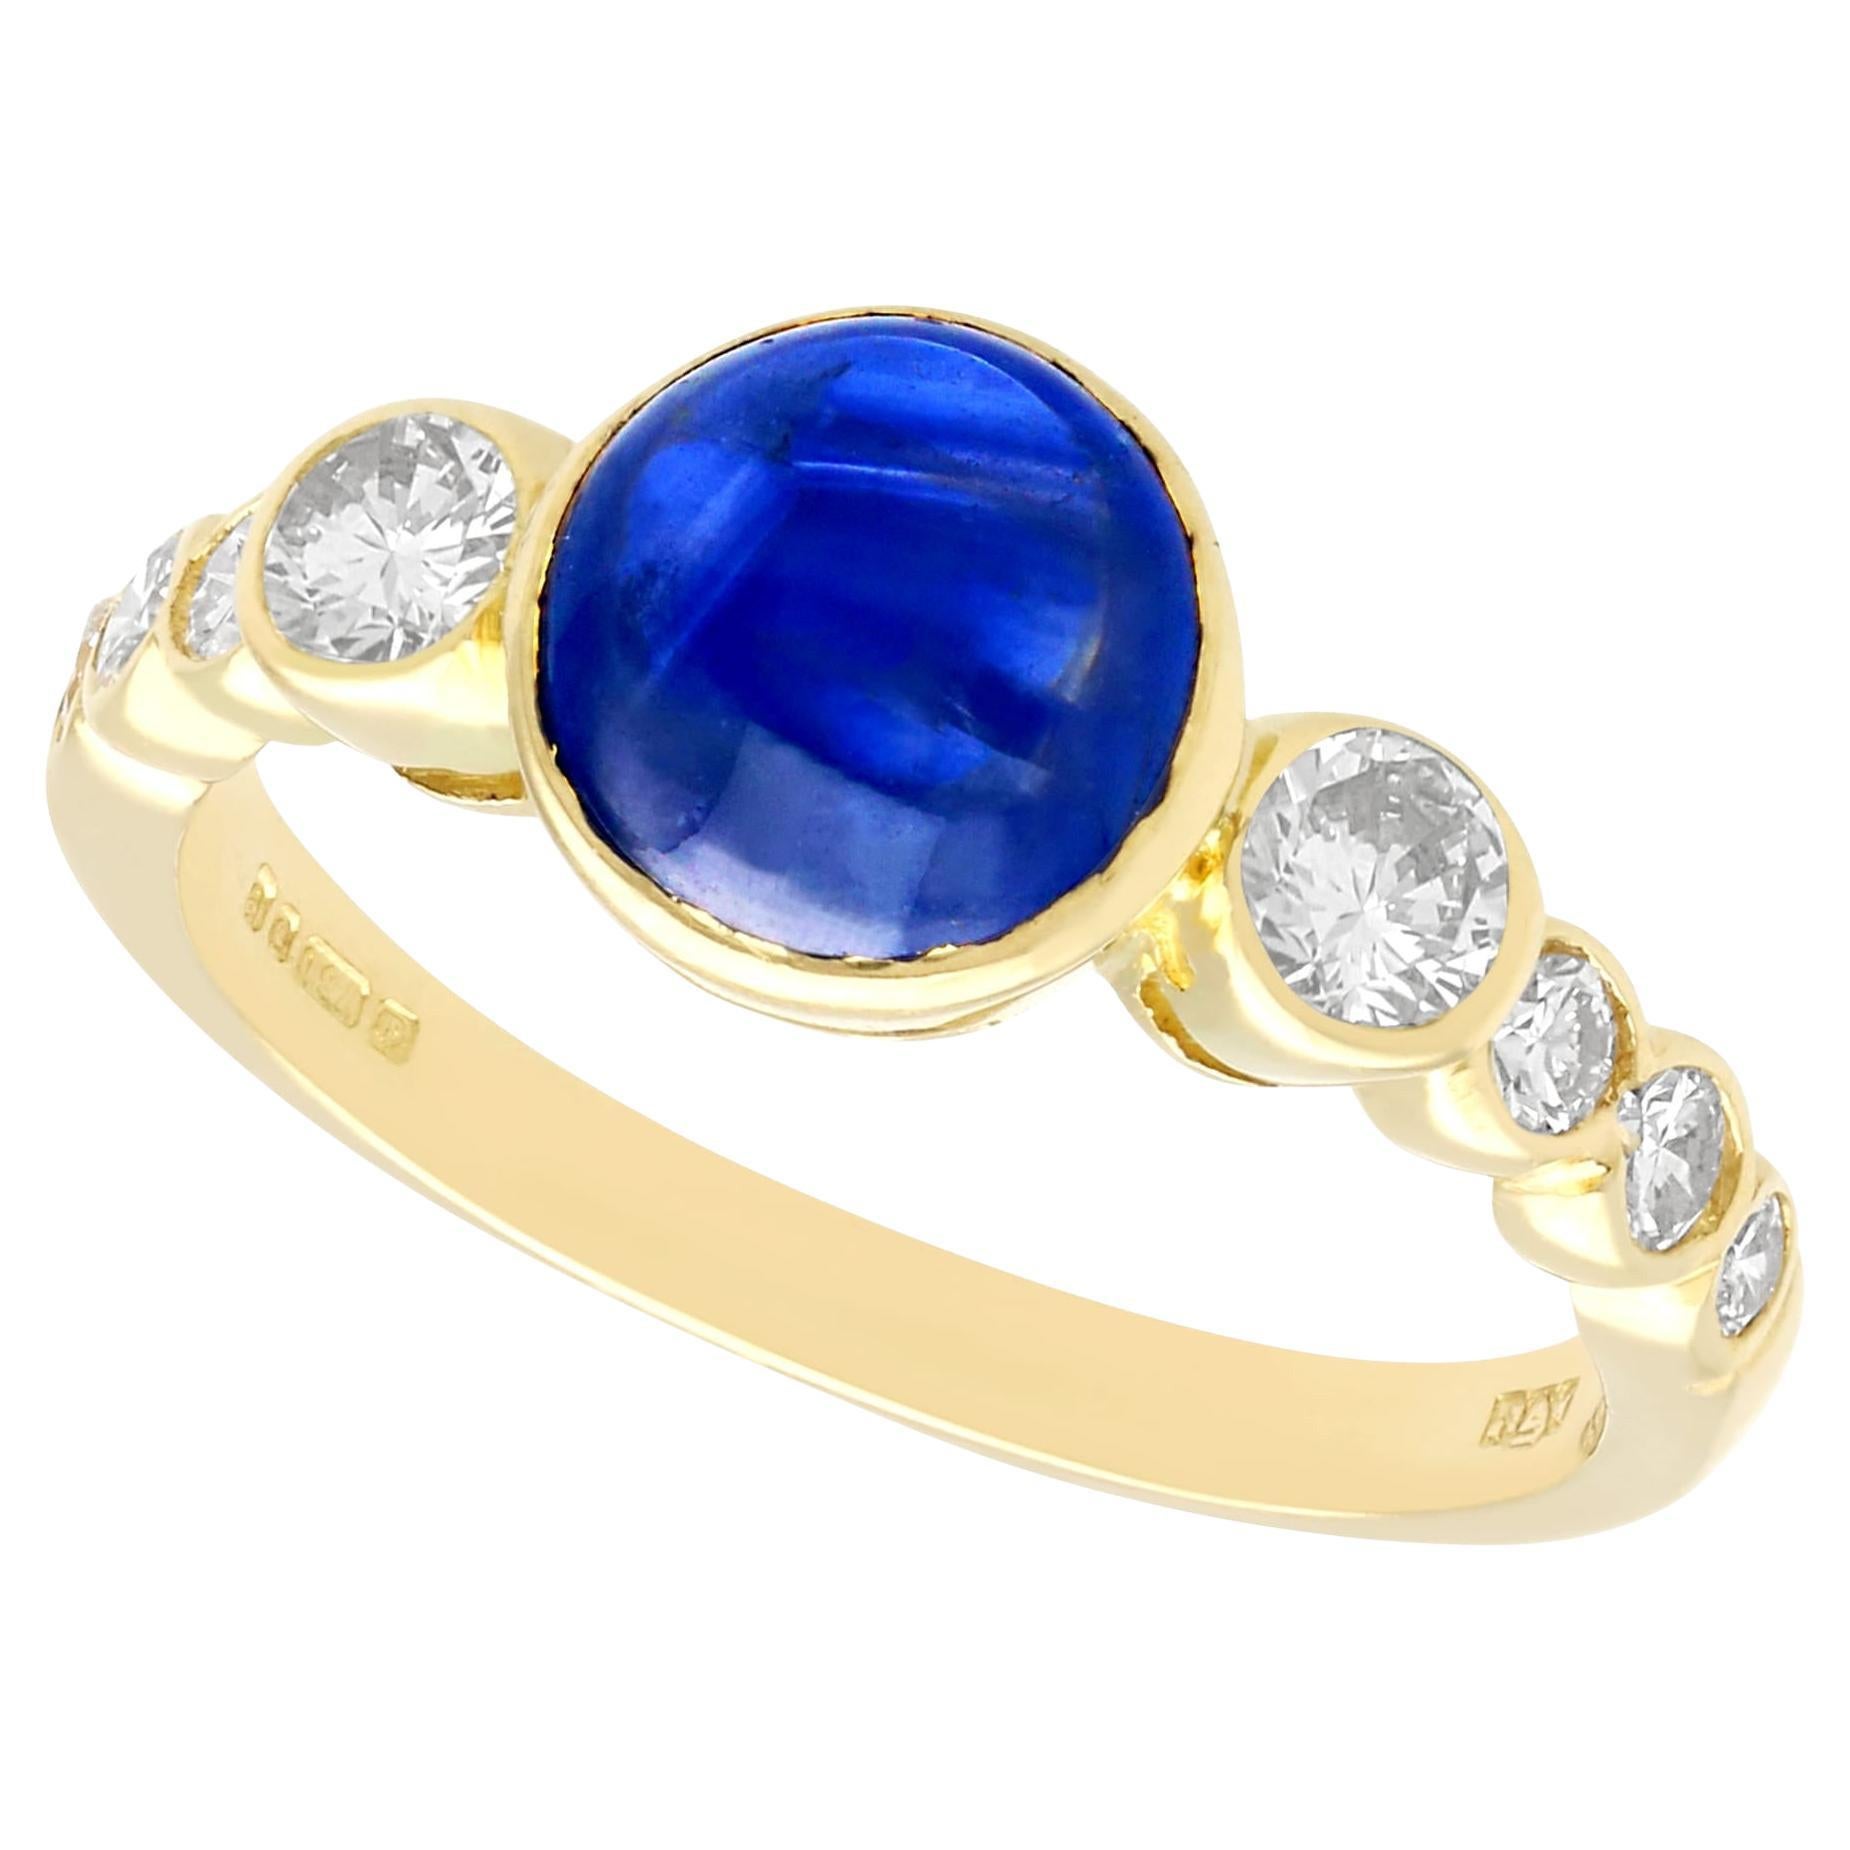 Vintage 1980s 1.74ct Cabochon Cut Sapphire and Diamond Yellow Gold Cocktail Ring For Sale